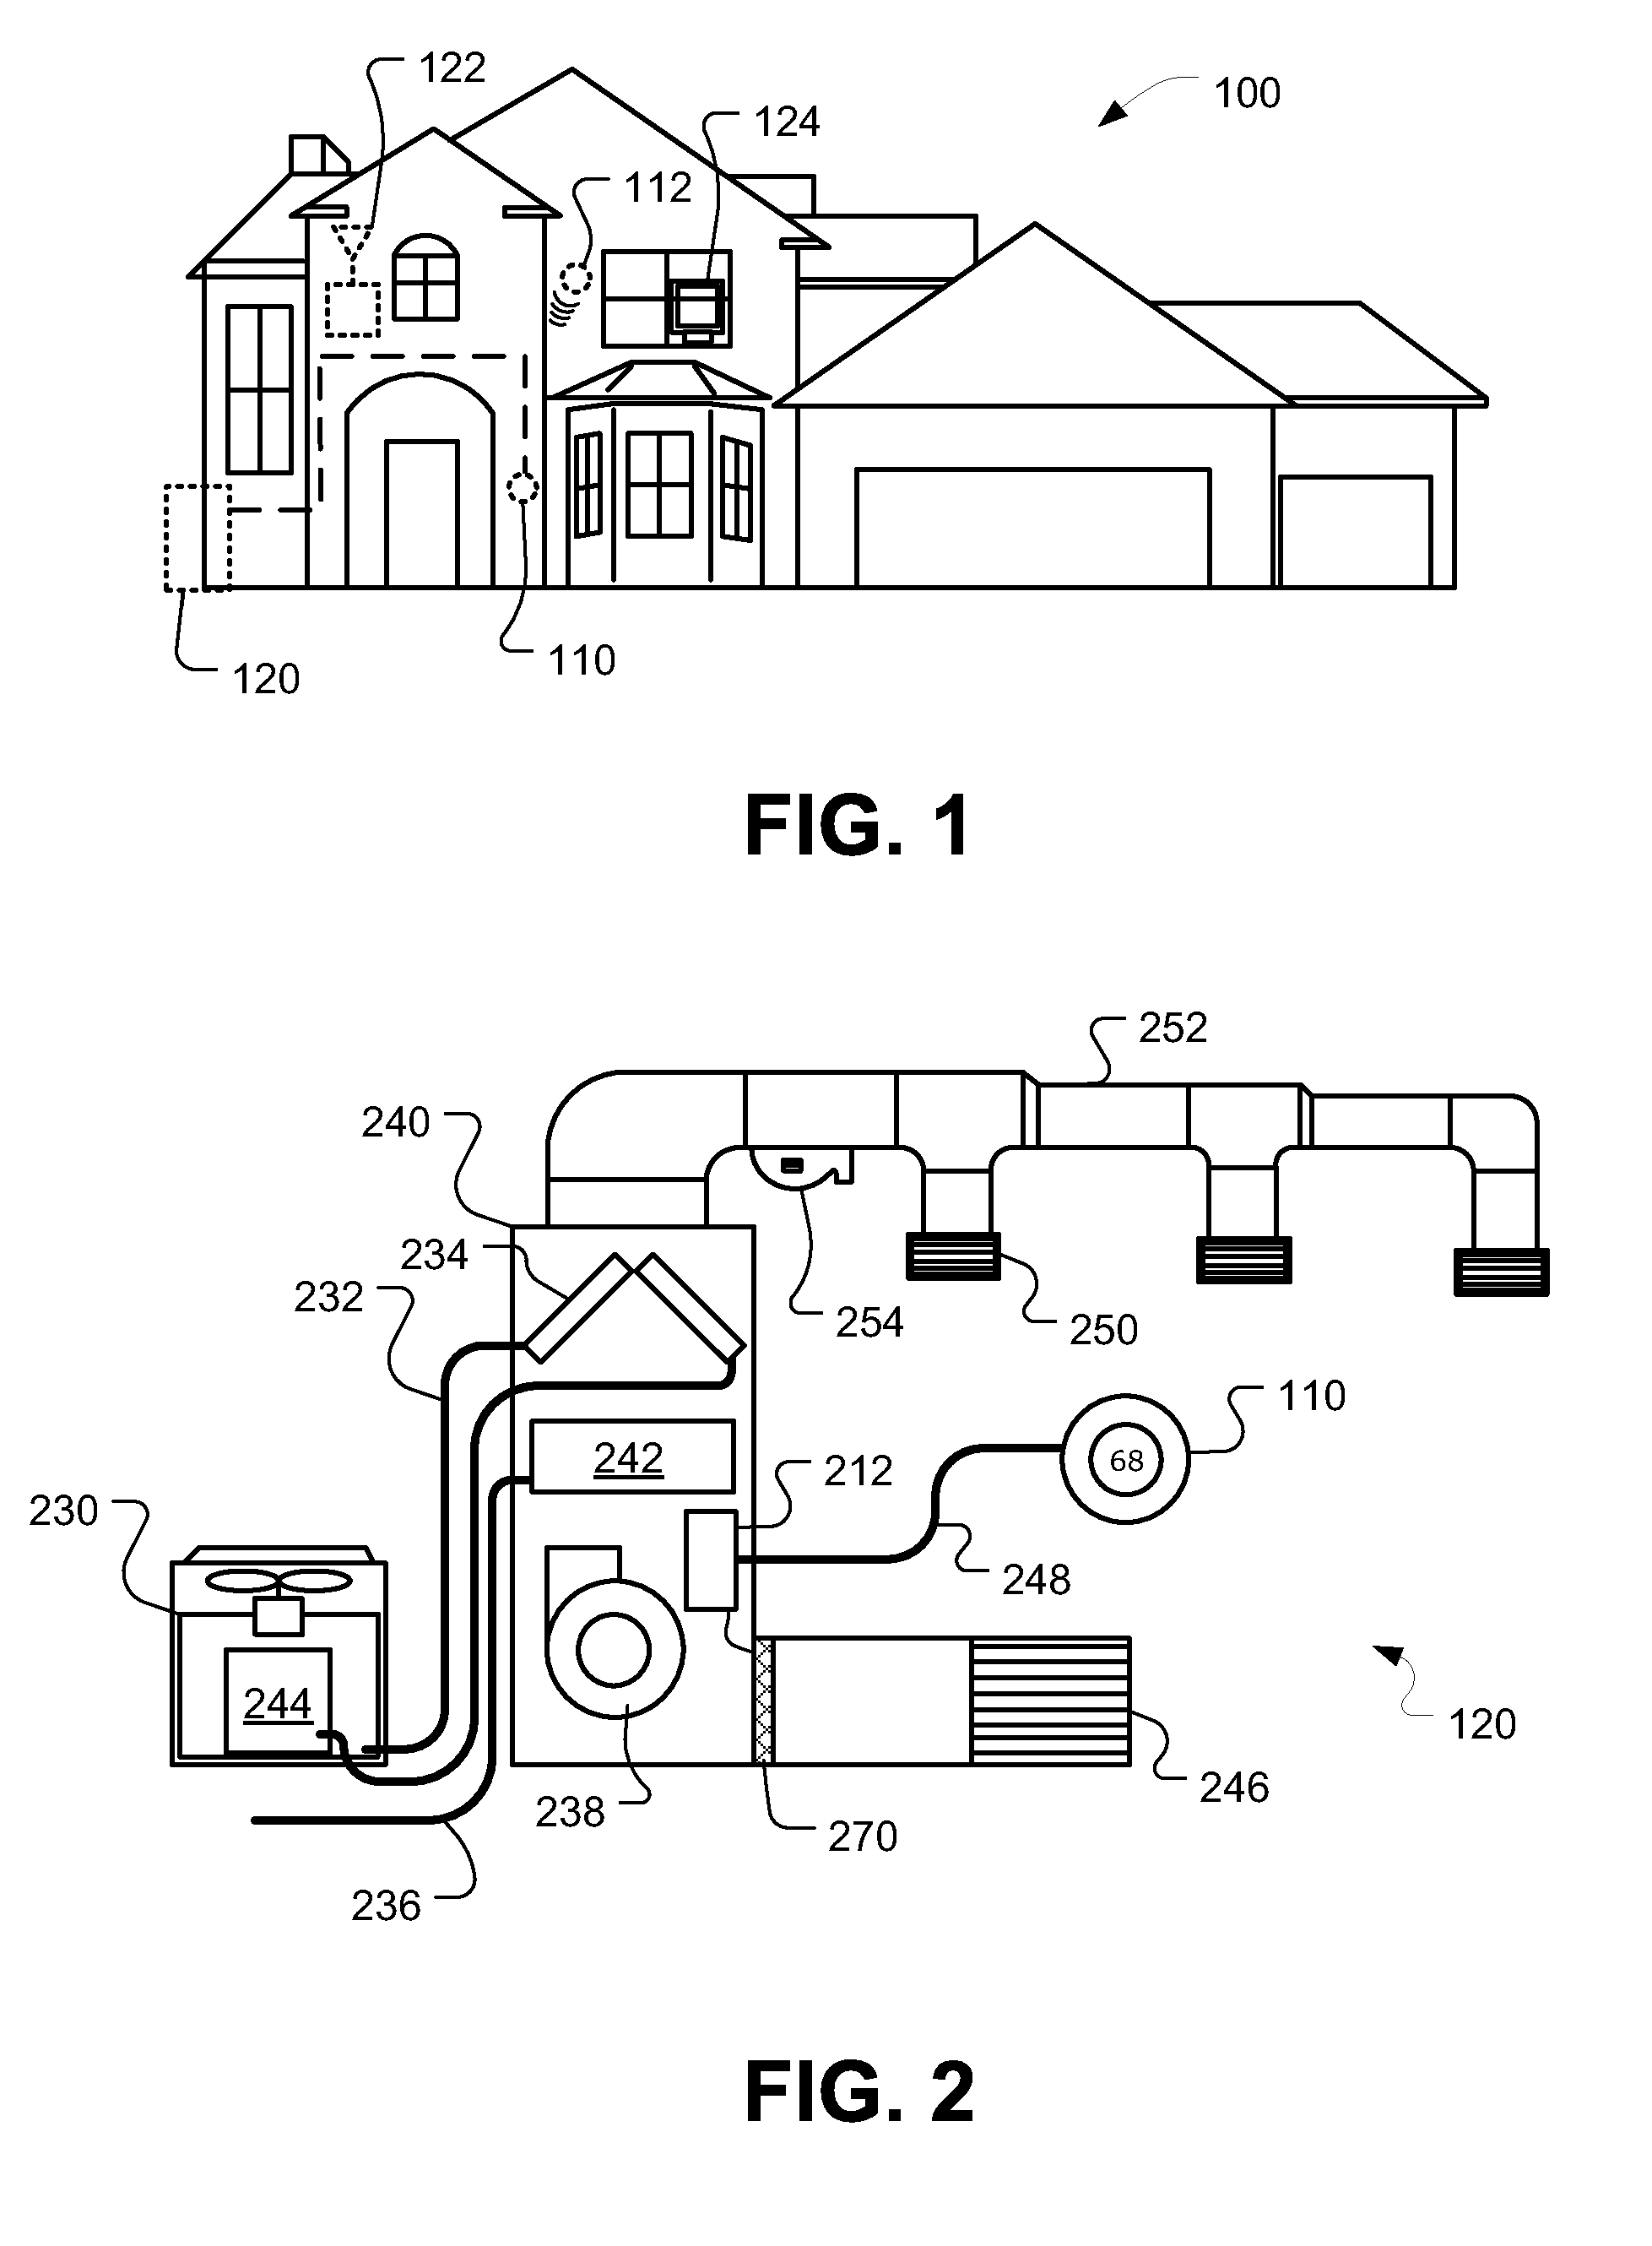 Methods and systems for data interchange between a network-connected thermostat and cloud-based management server